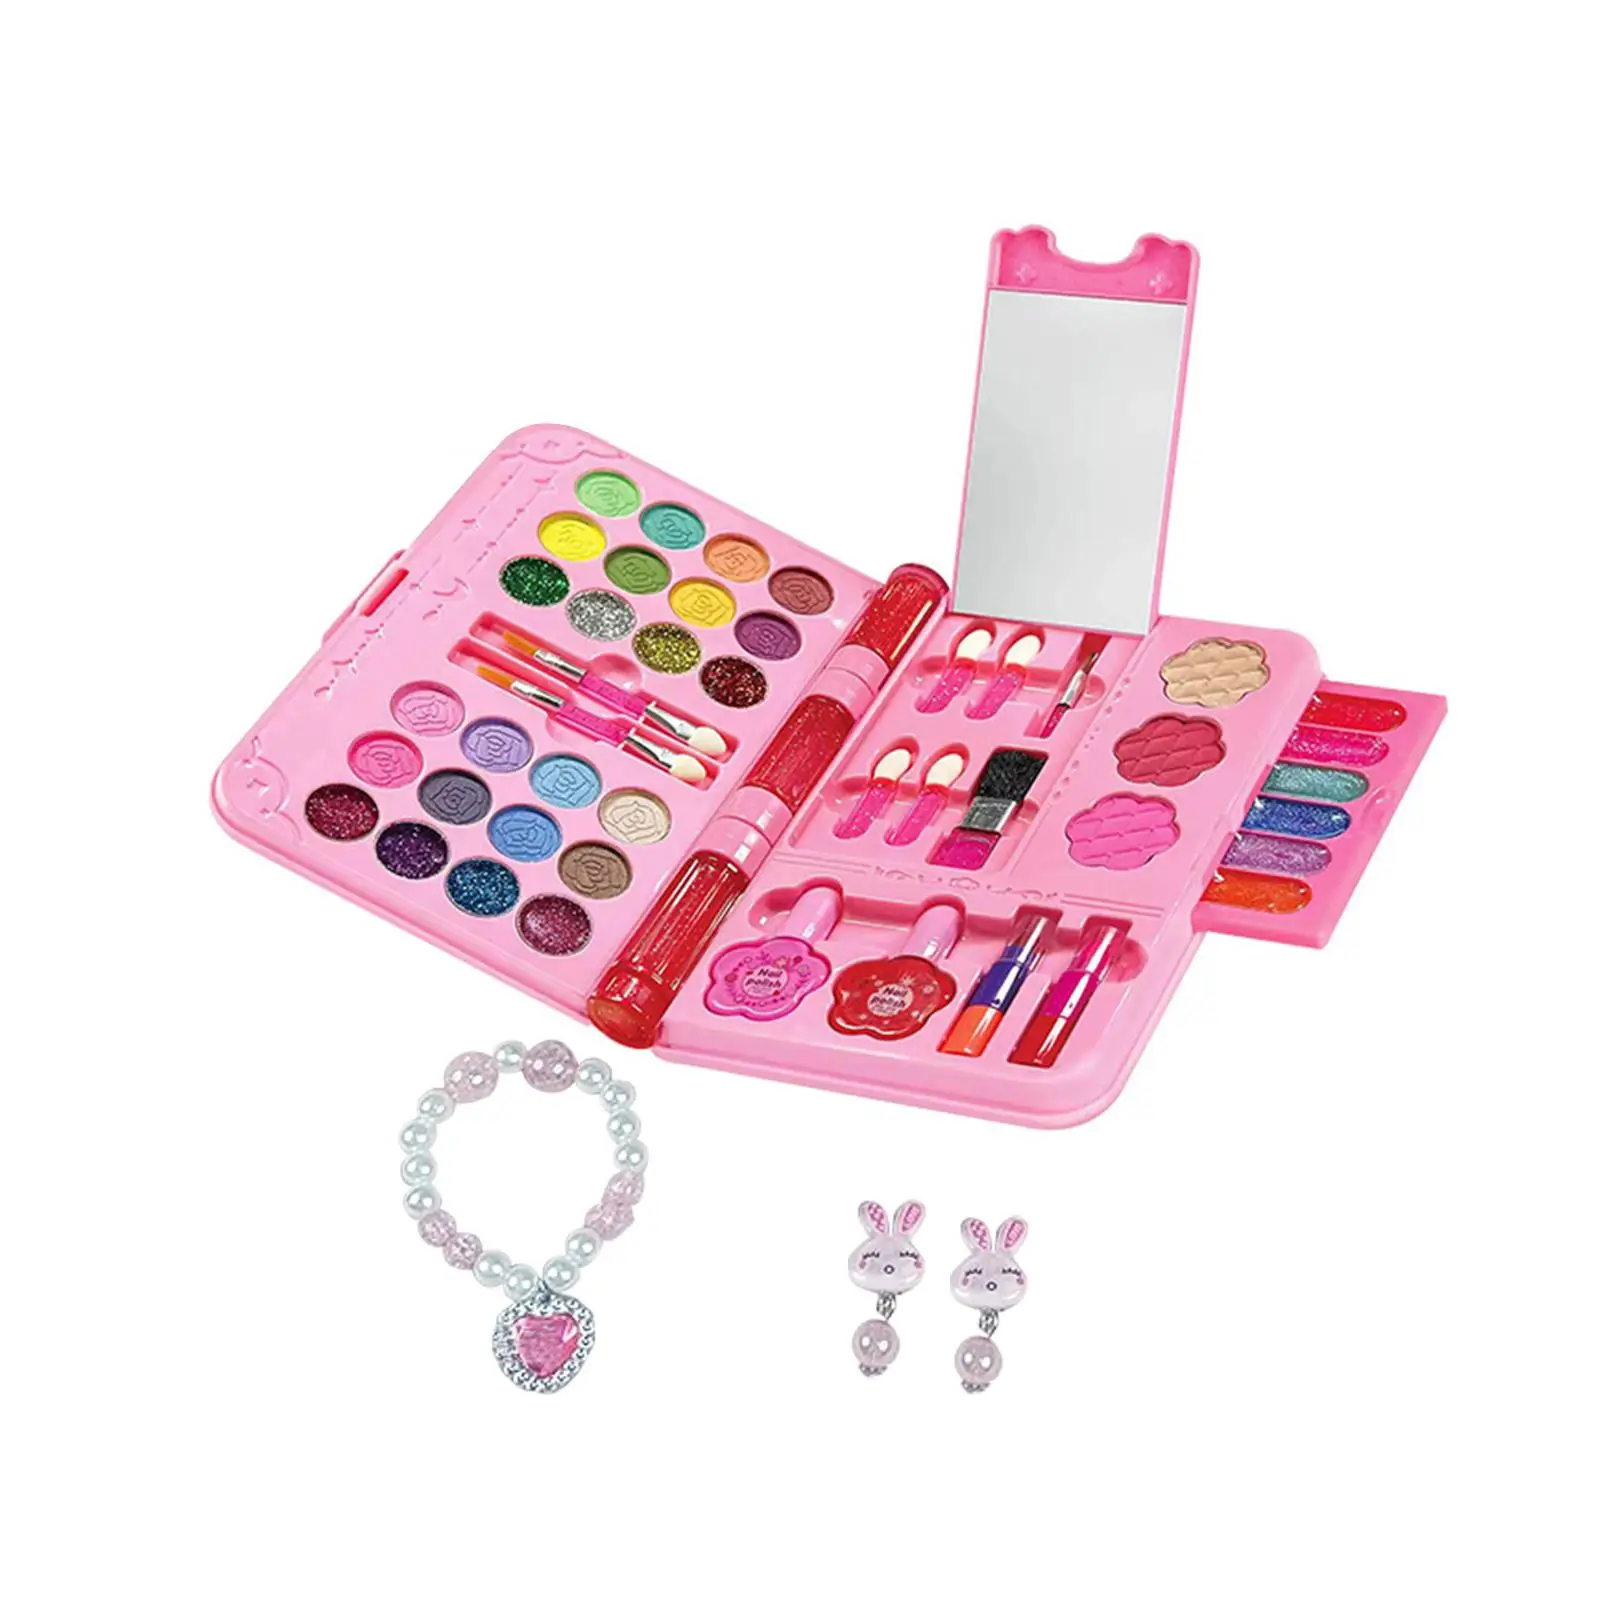 Children Makeup Playing Box Vanity Set Girls Toy Portable Role Playing Toy Cosmetic Toy Beauty Set for Kids Girls Birthday Gifts